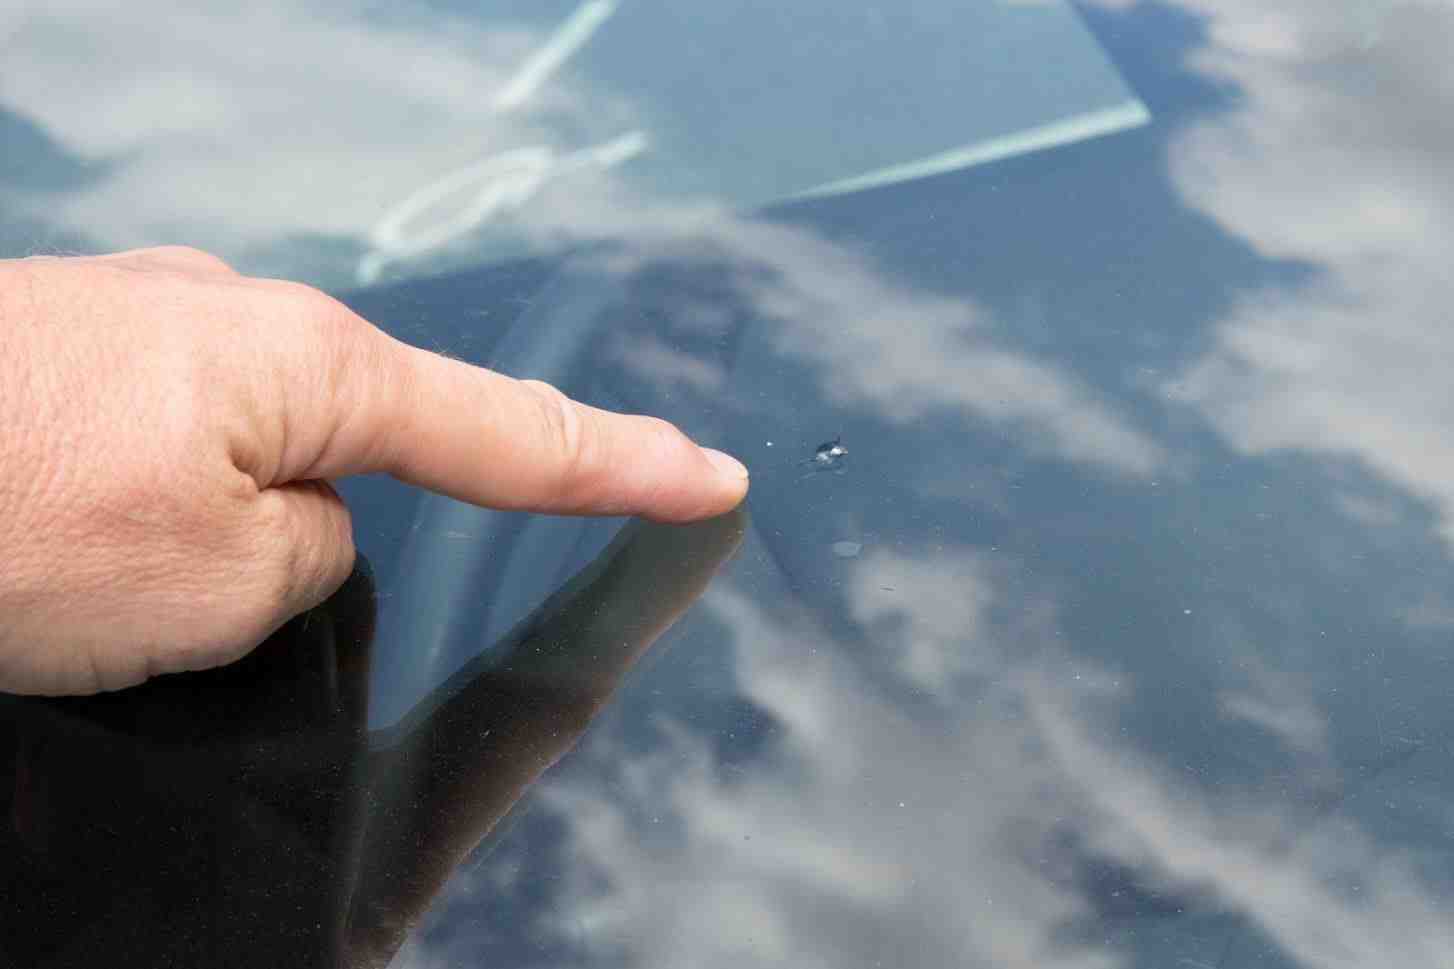 How long will Cracked windshield last?